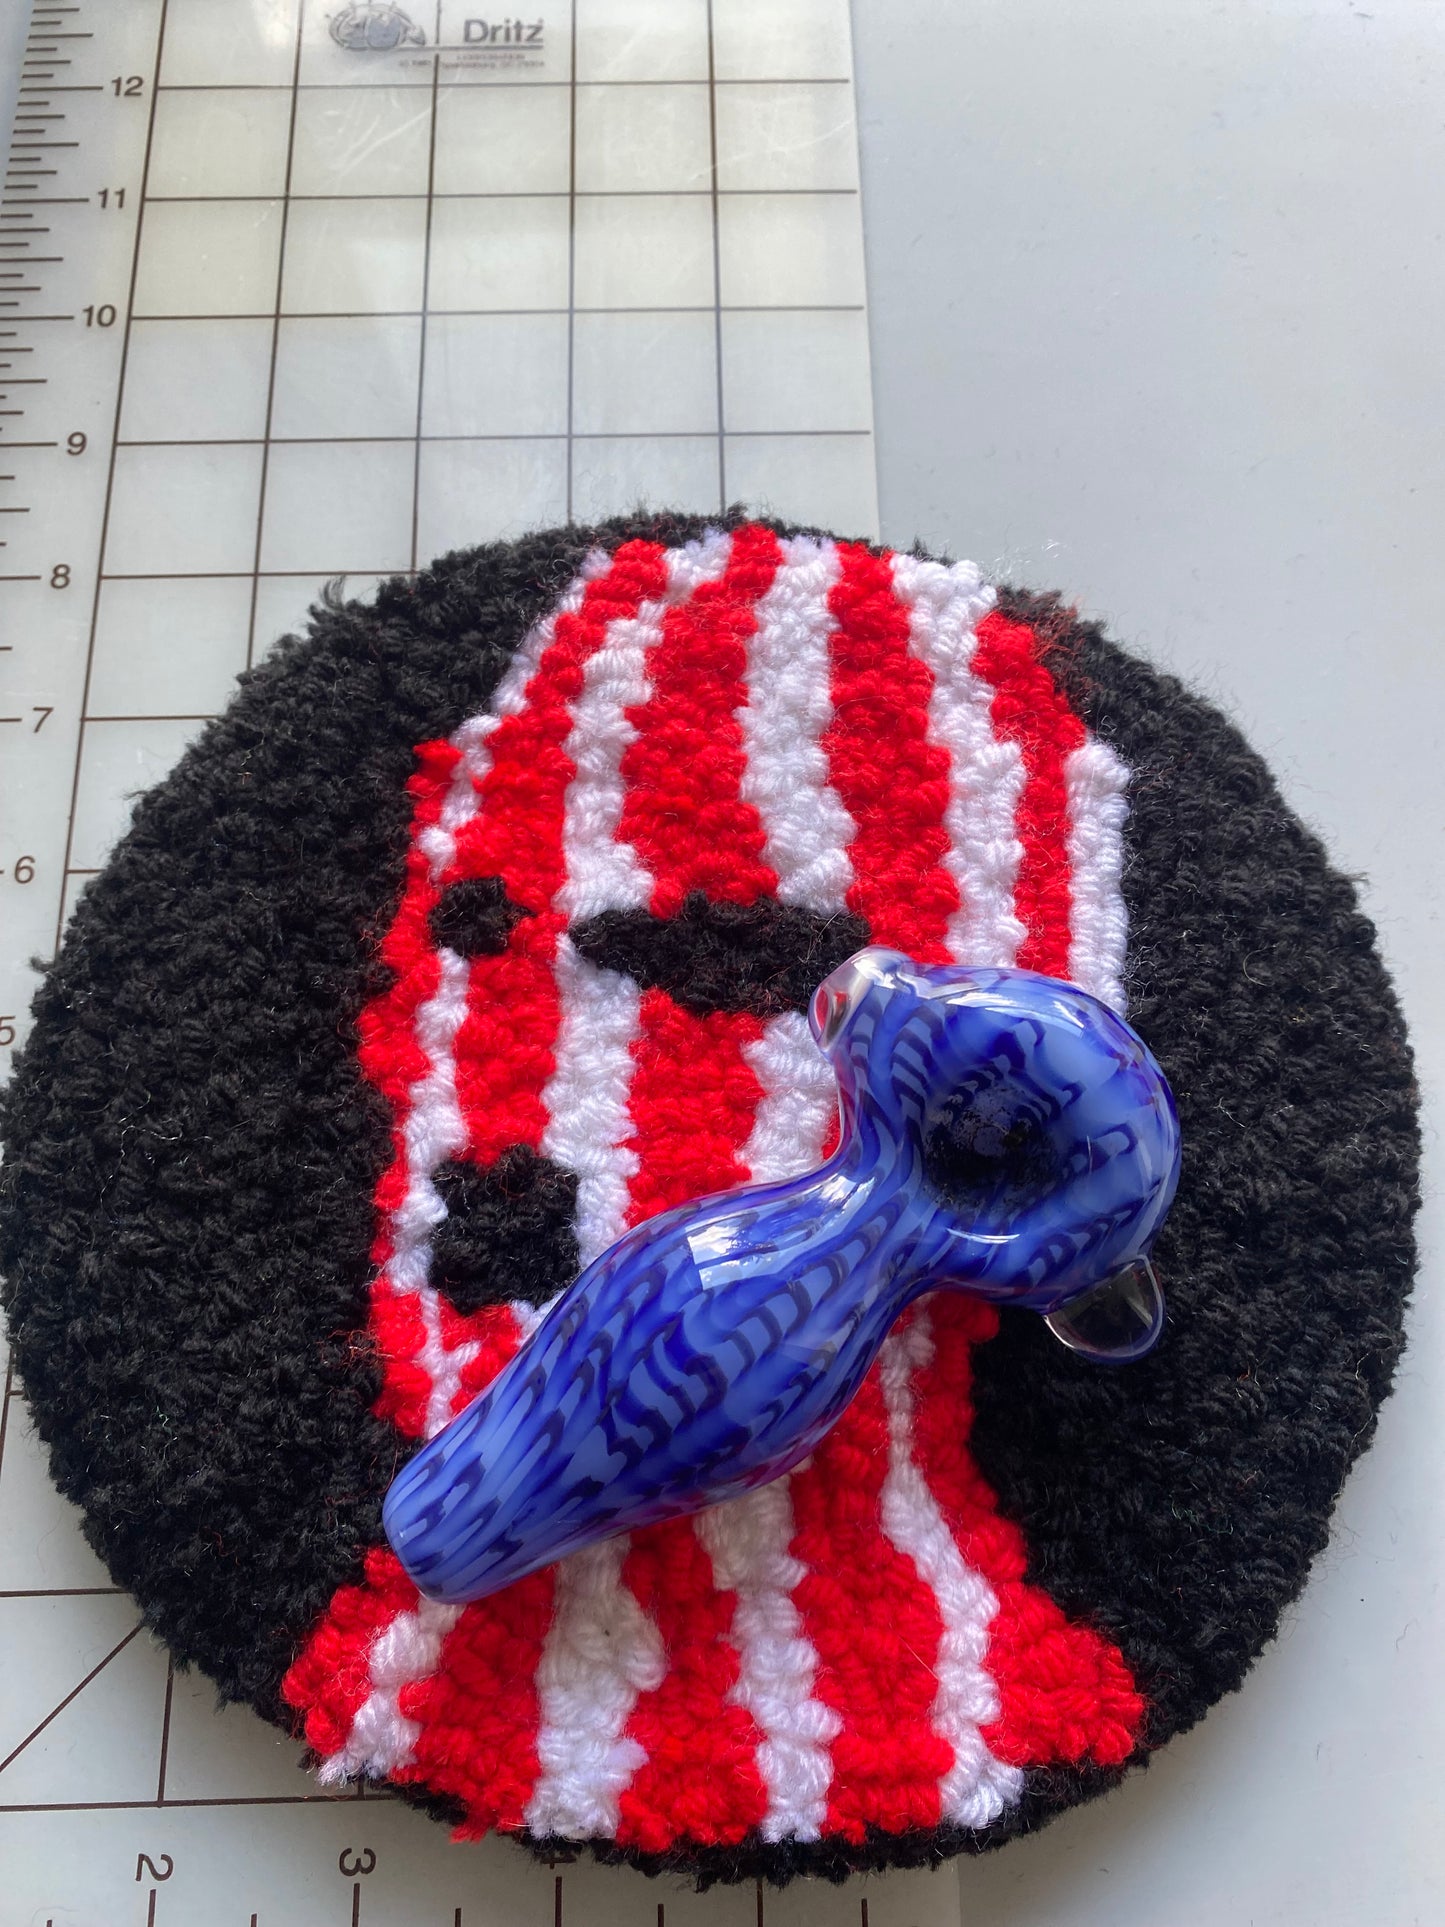 Candy Cane 8.5” Hand Tuft Carpet Bong/Pipe Display